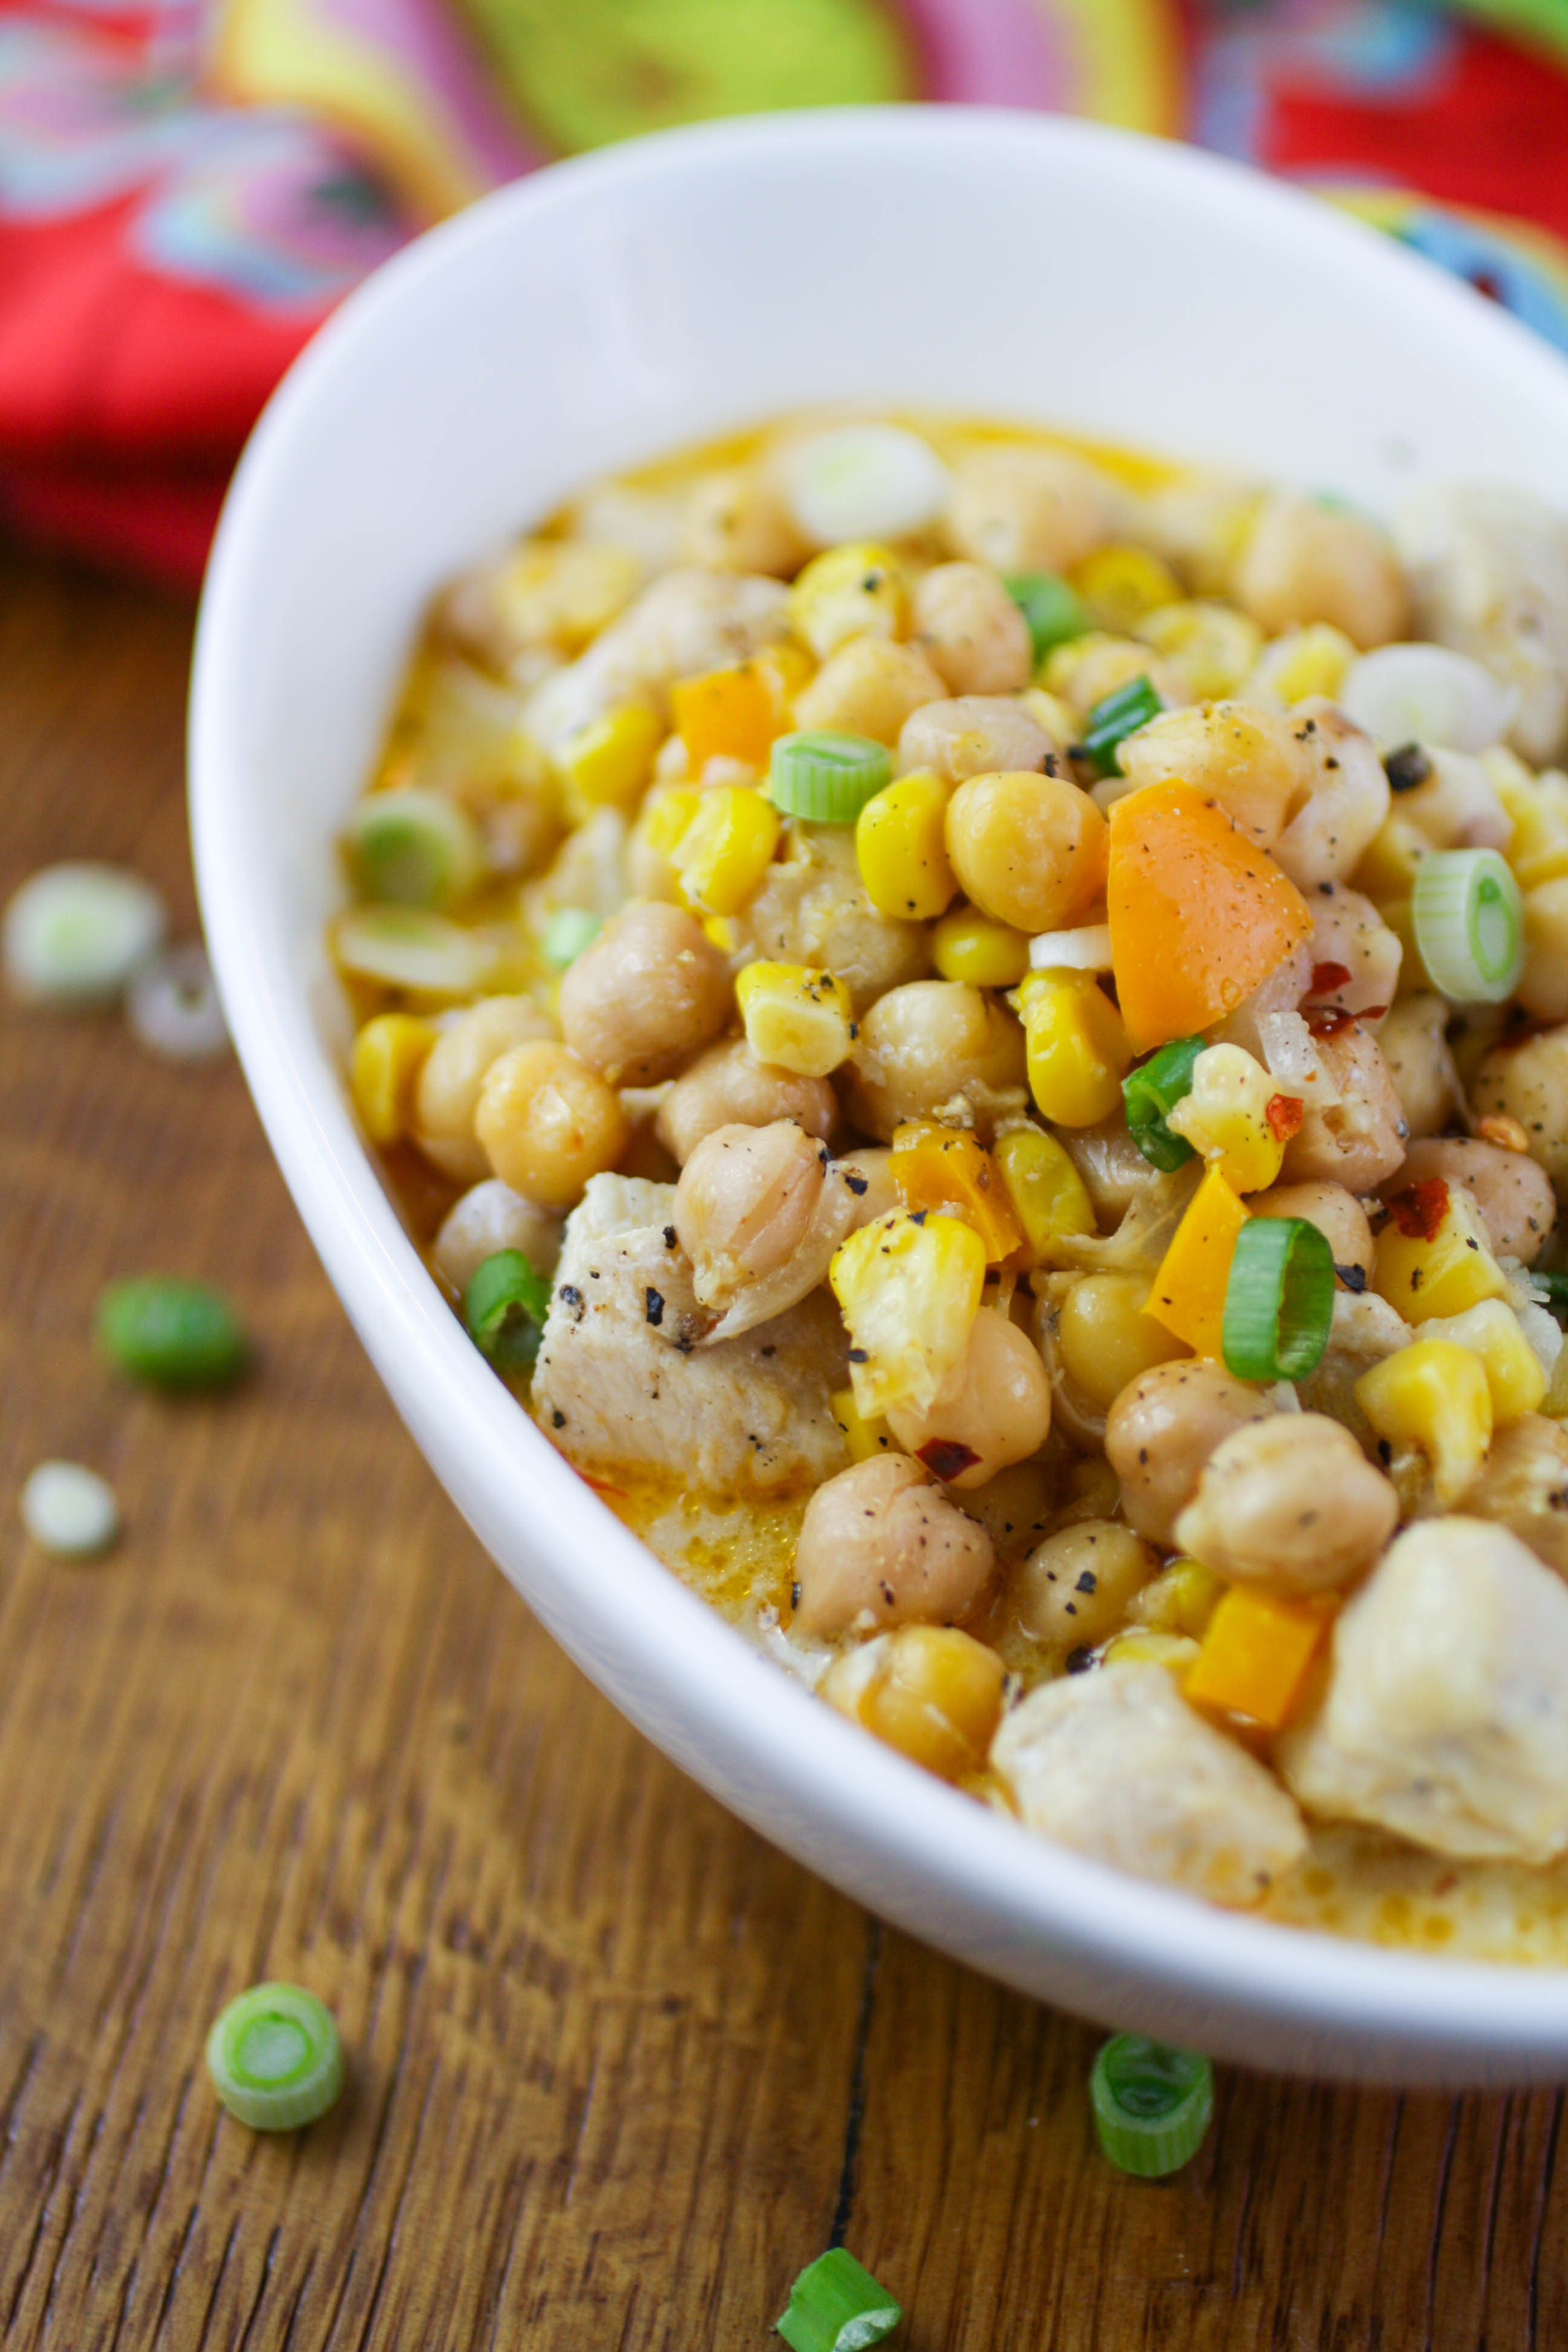 Easy Chicken and Chickpea Chili is the kind of dish you'll want to dig into on a cold night! This chili is a great dish to make after a busy day -- it's so easy to put together!